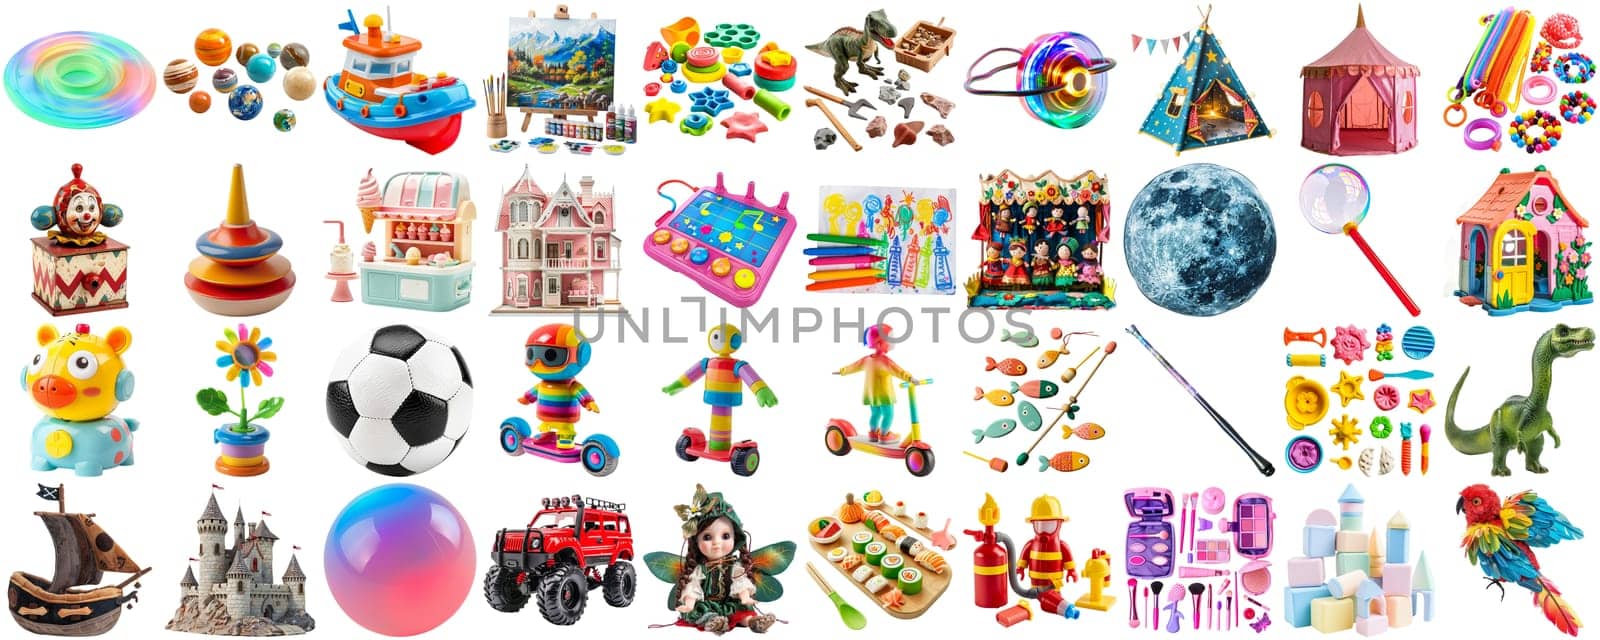 big collection of different toys for children kid, school playroom decor, magnet toy, doll, teddy bear, board game, photo collage set, isolated transparent background AIG44